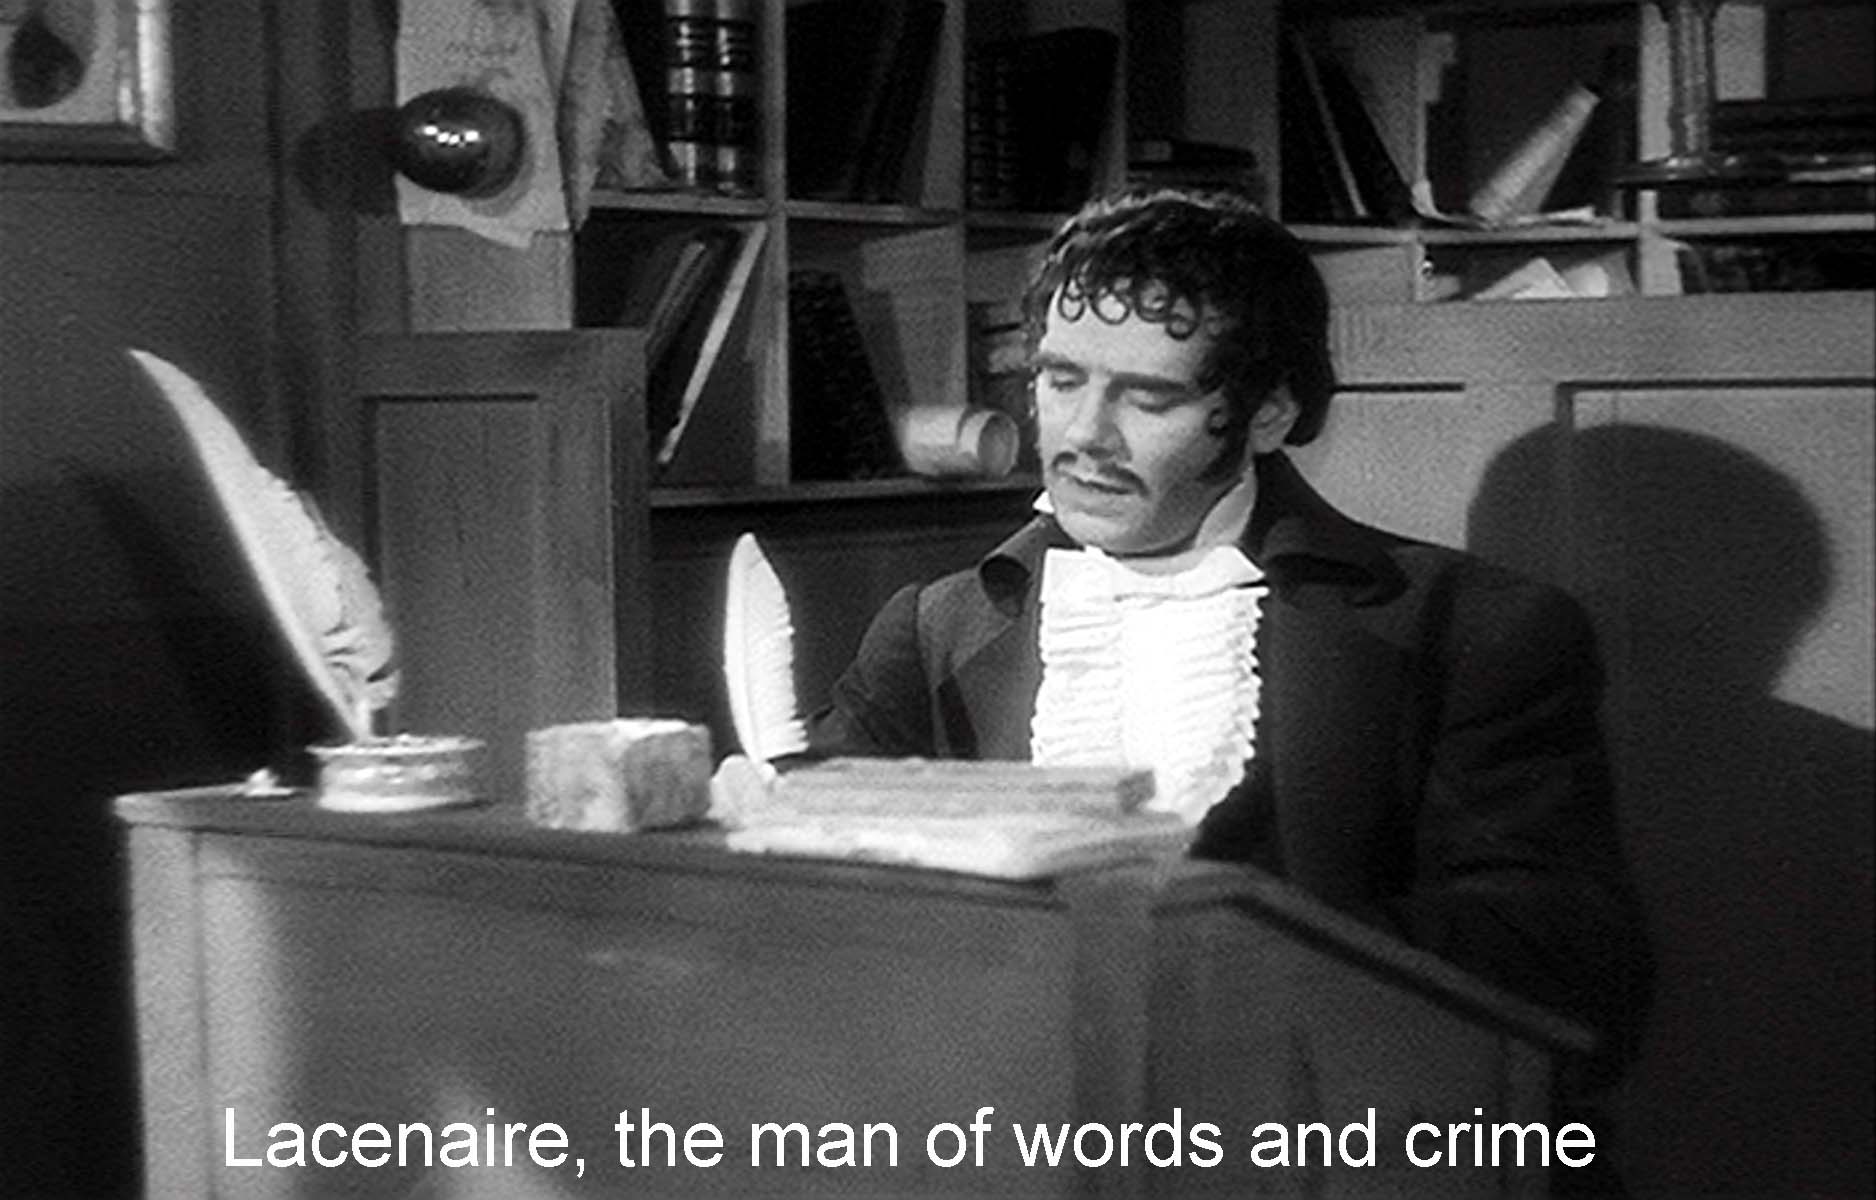 Lacenaire: the man of words and crime